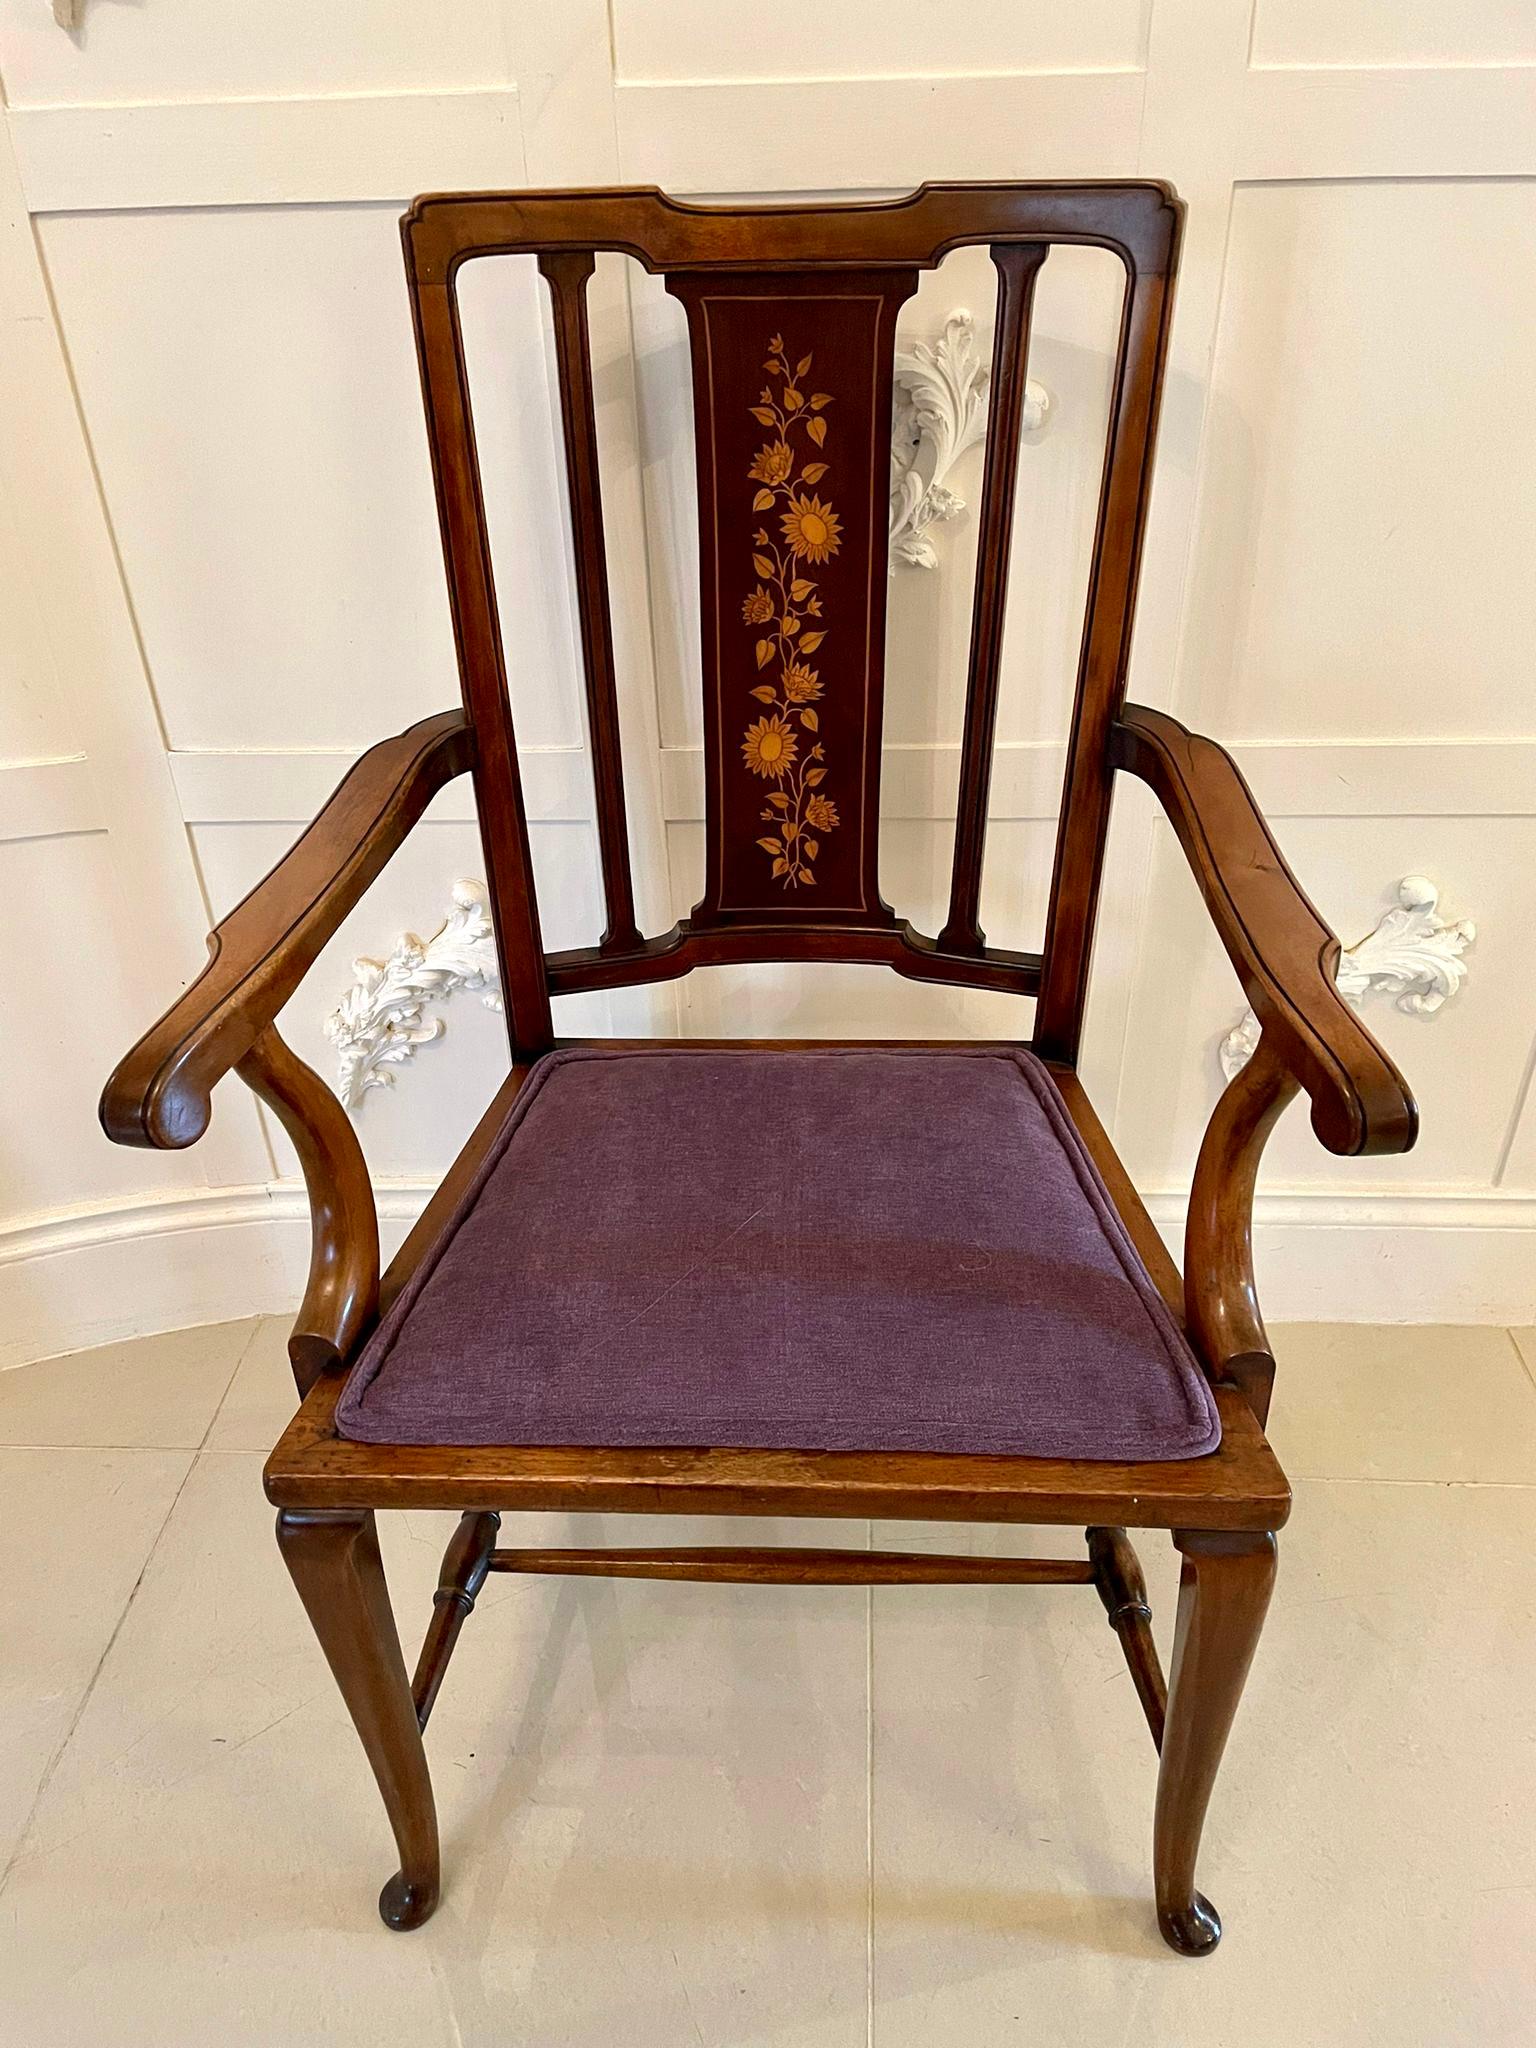 Pair of Antique Edwardian Inlaid Mahogany Desk Chairs In Good Condition For Sale In Suffolk, GB